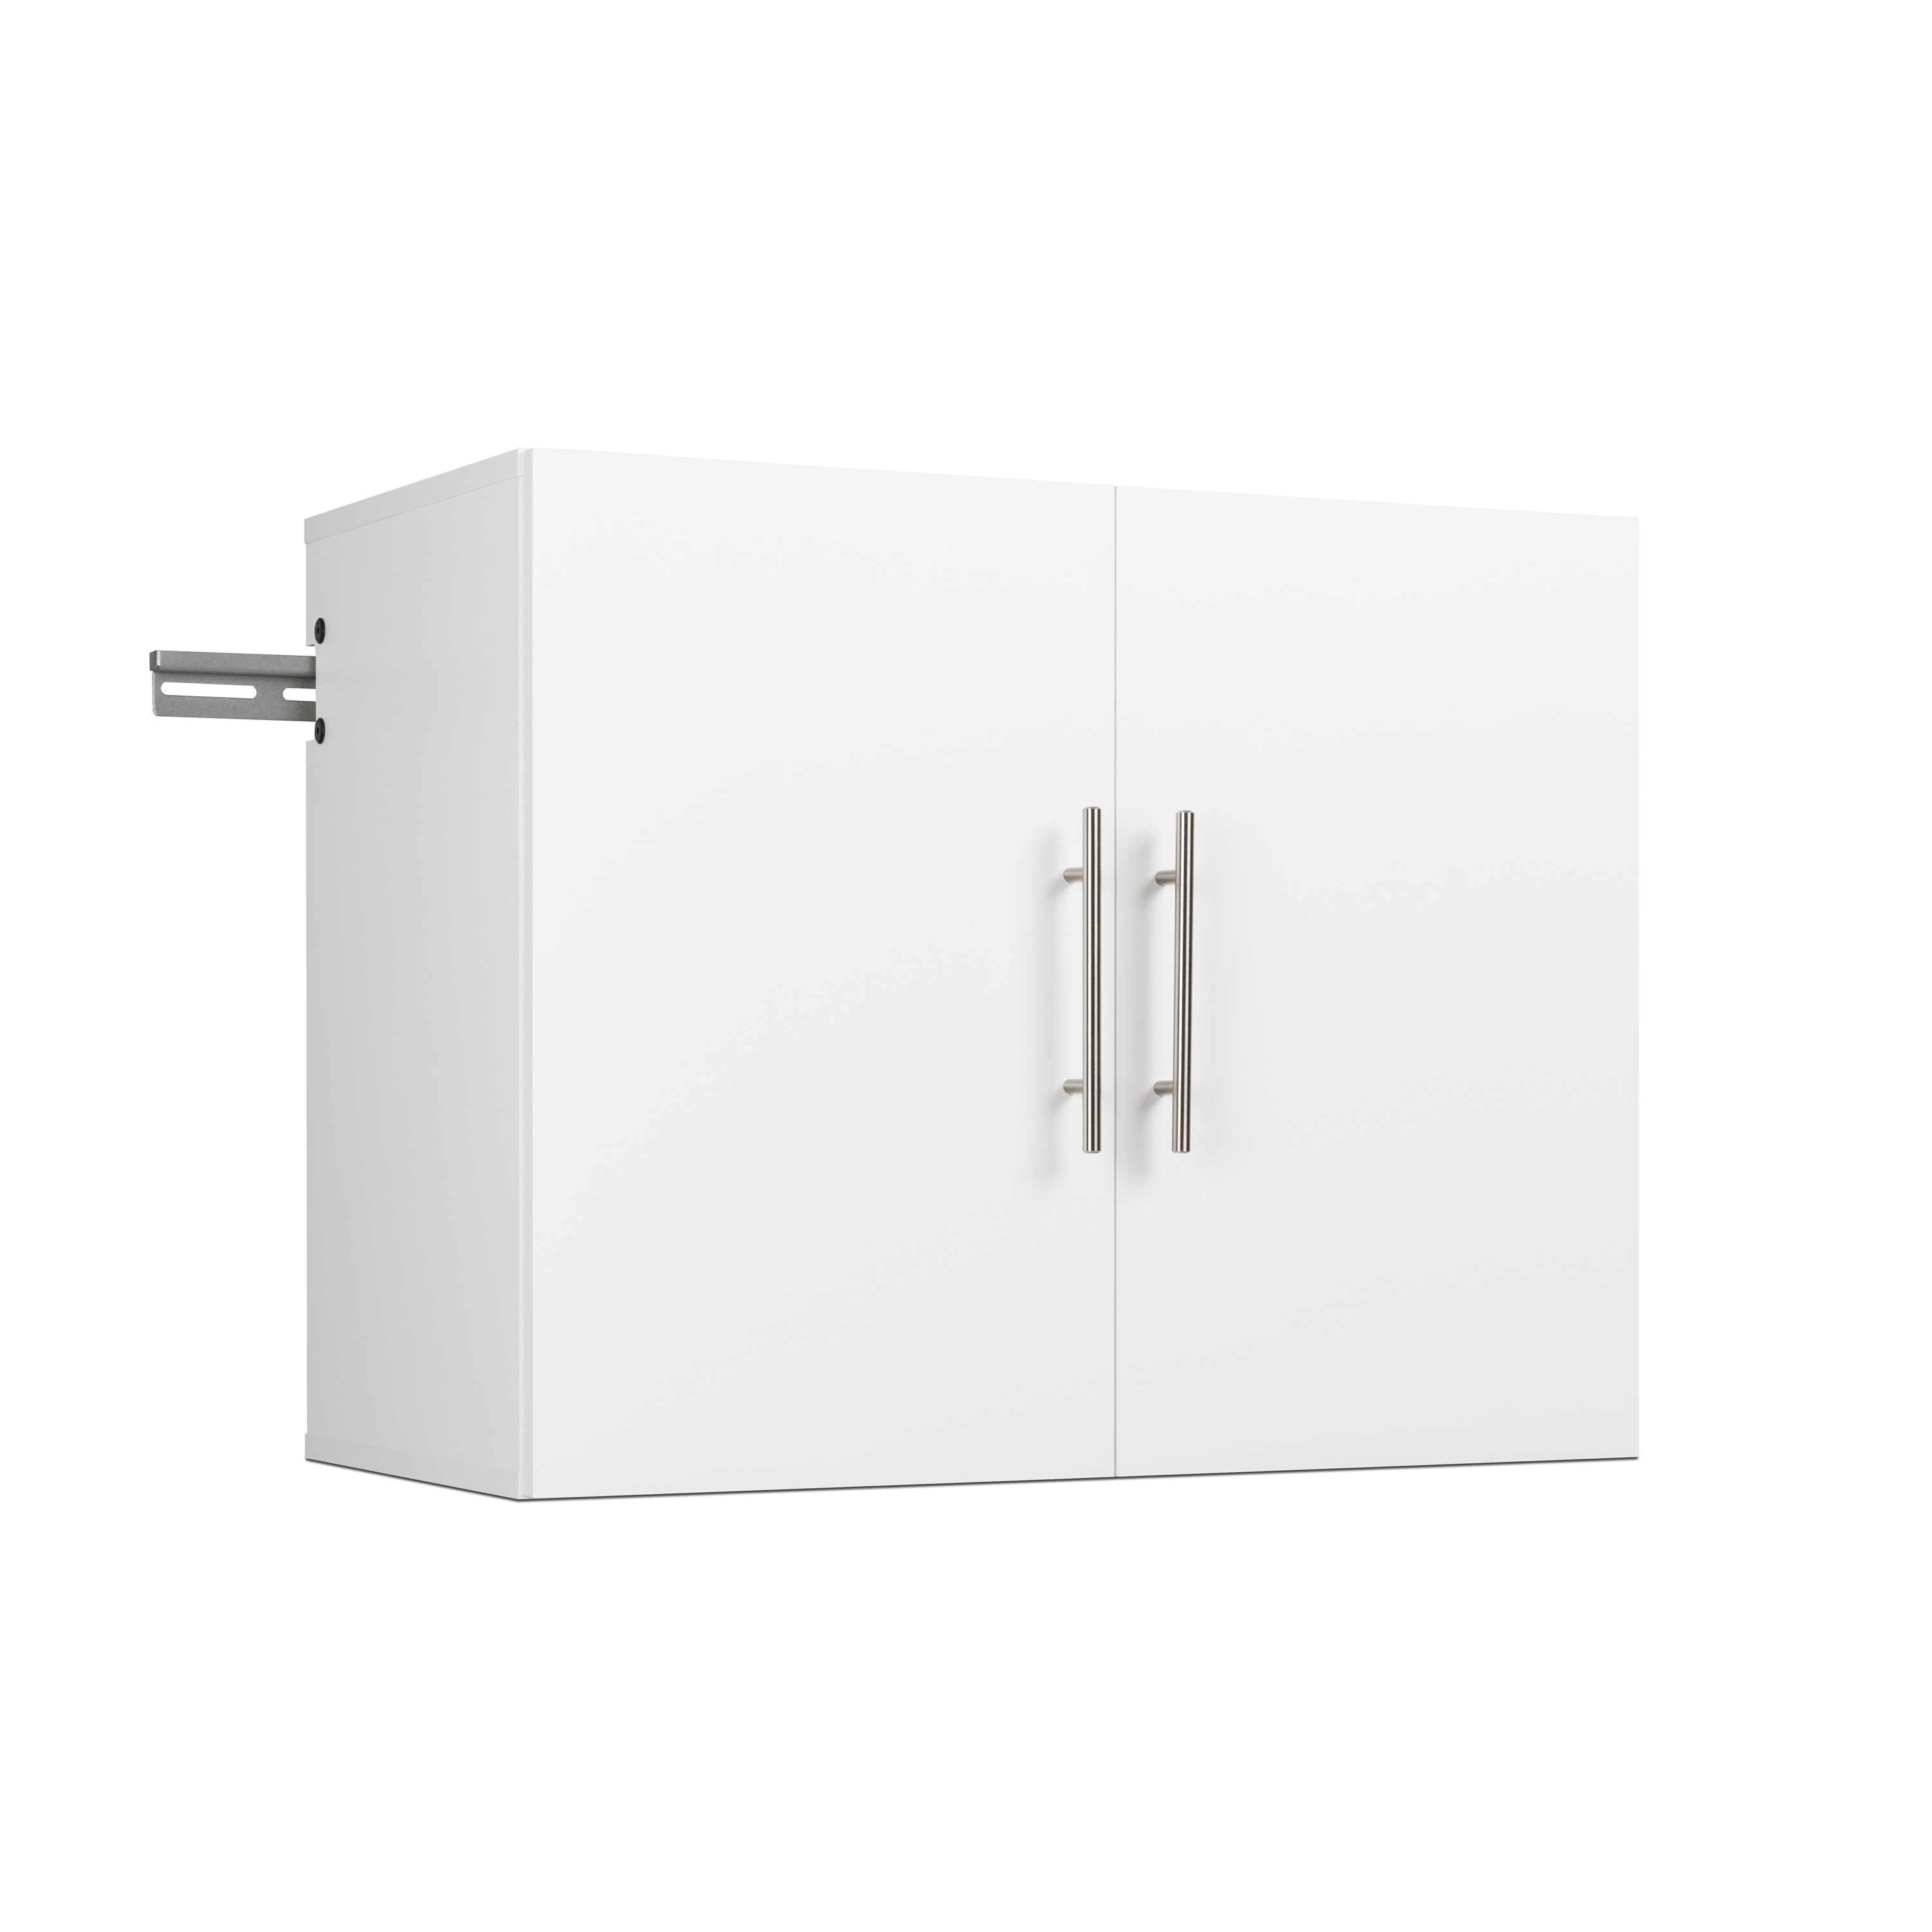 Prepac HangUps Composite Wood Wall-mounted Garage Cabinet in White